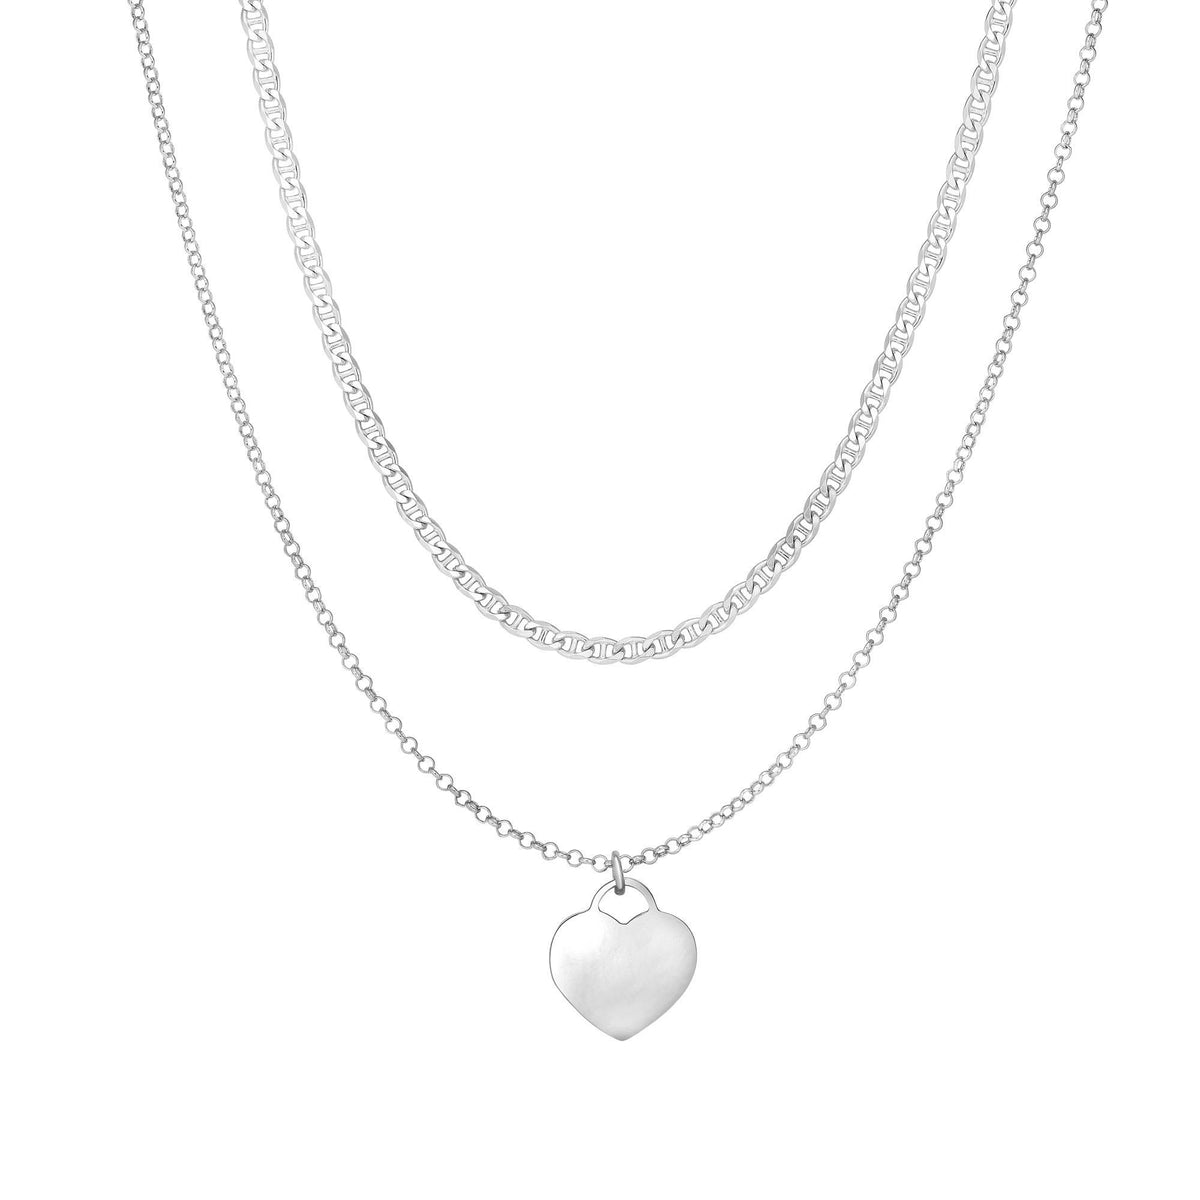 Sterling Silver Heart Pendant Choker Necklace, 16" fine designer jewelry for men and women